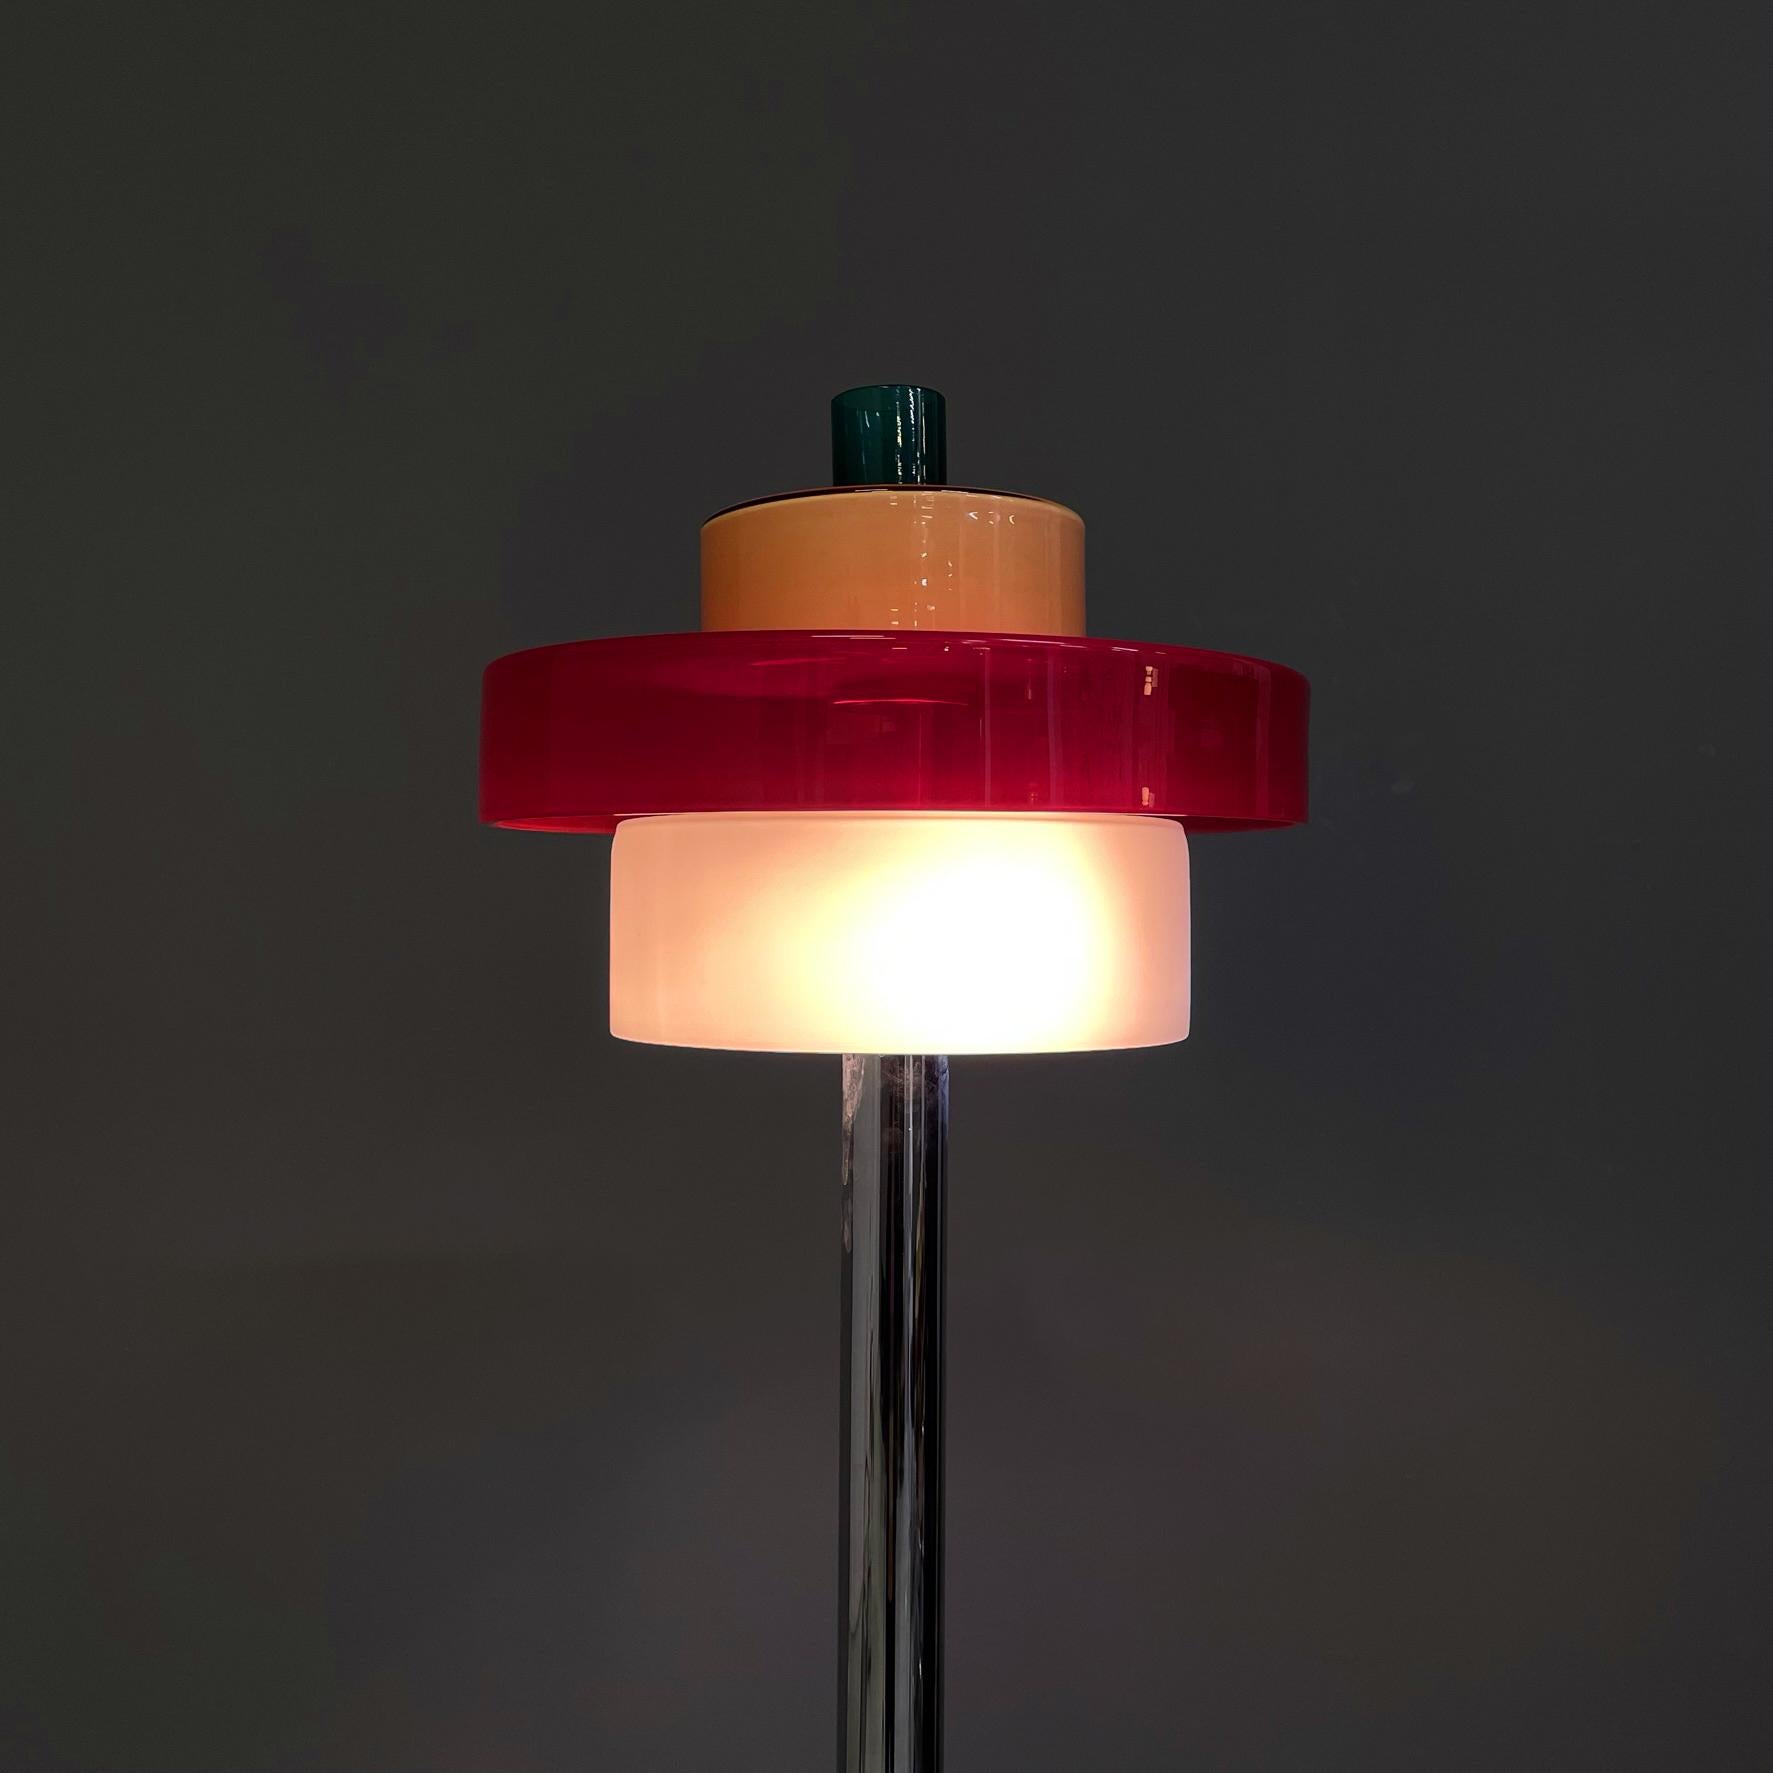 Late 20th Century Italian Modern Glass Floor Lamp Allarnisam by Ettore Sottsass for Venini, 1990s For Sale